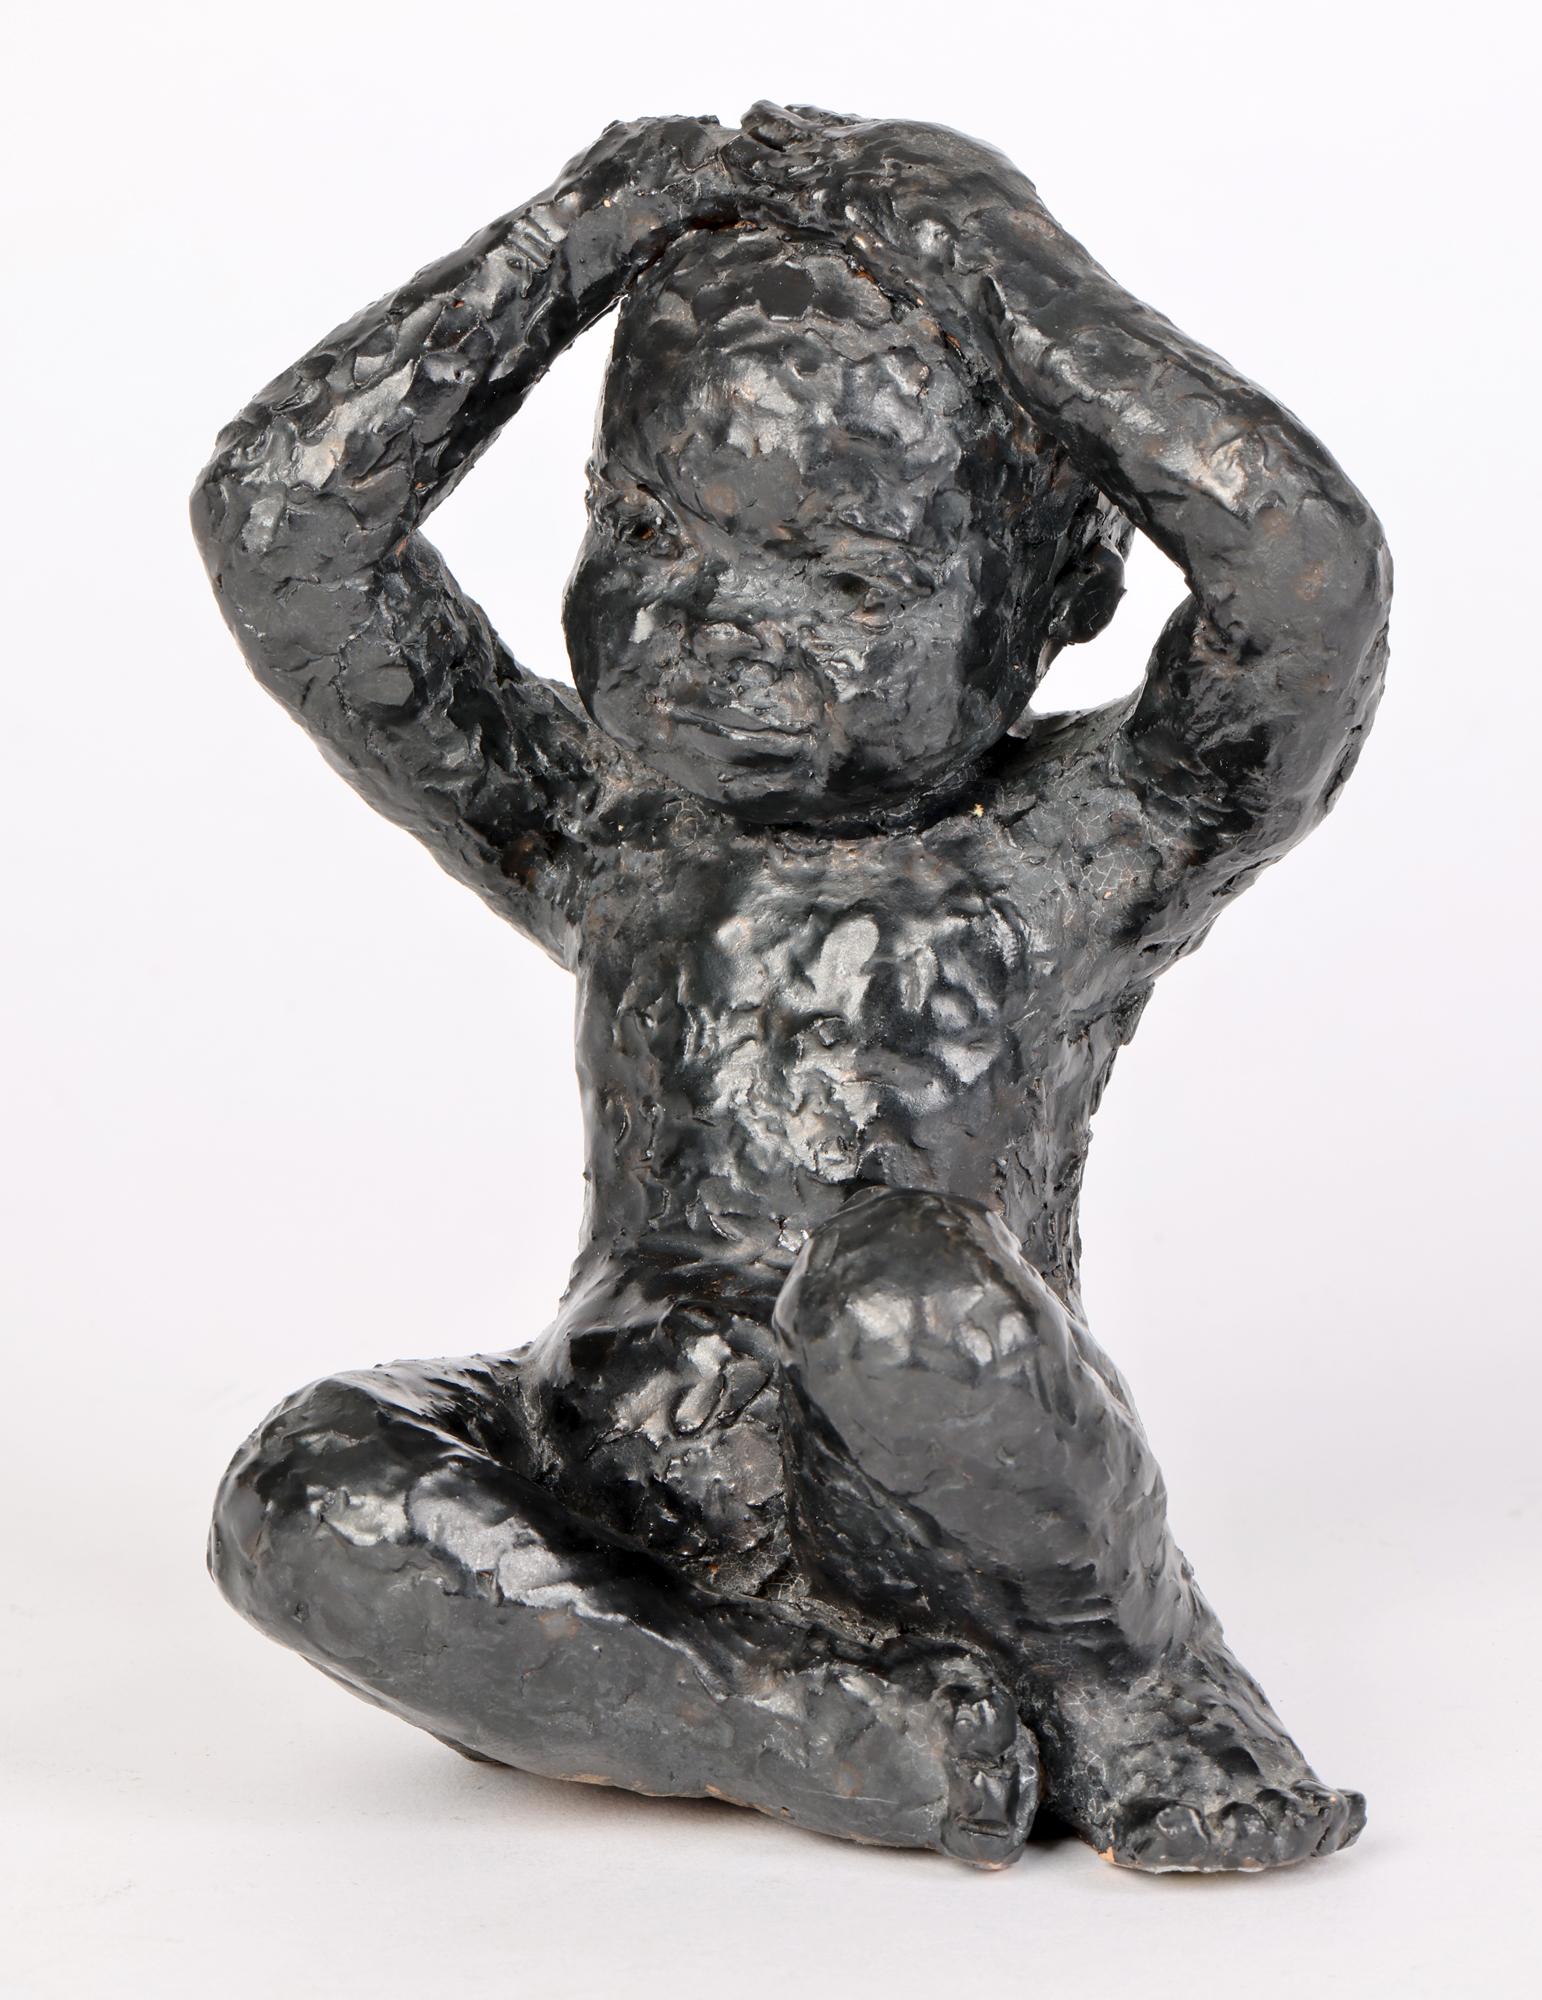 George West Studio Pottery Black Glazed Seated Child Sculpture Dated 1969 For Sale 3